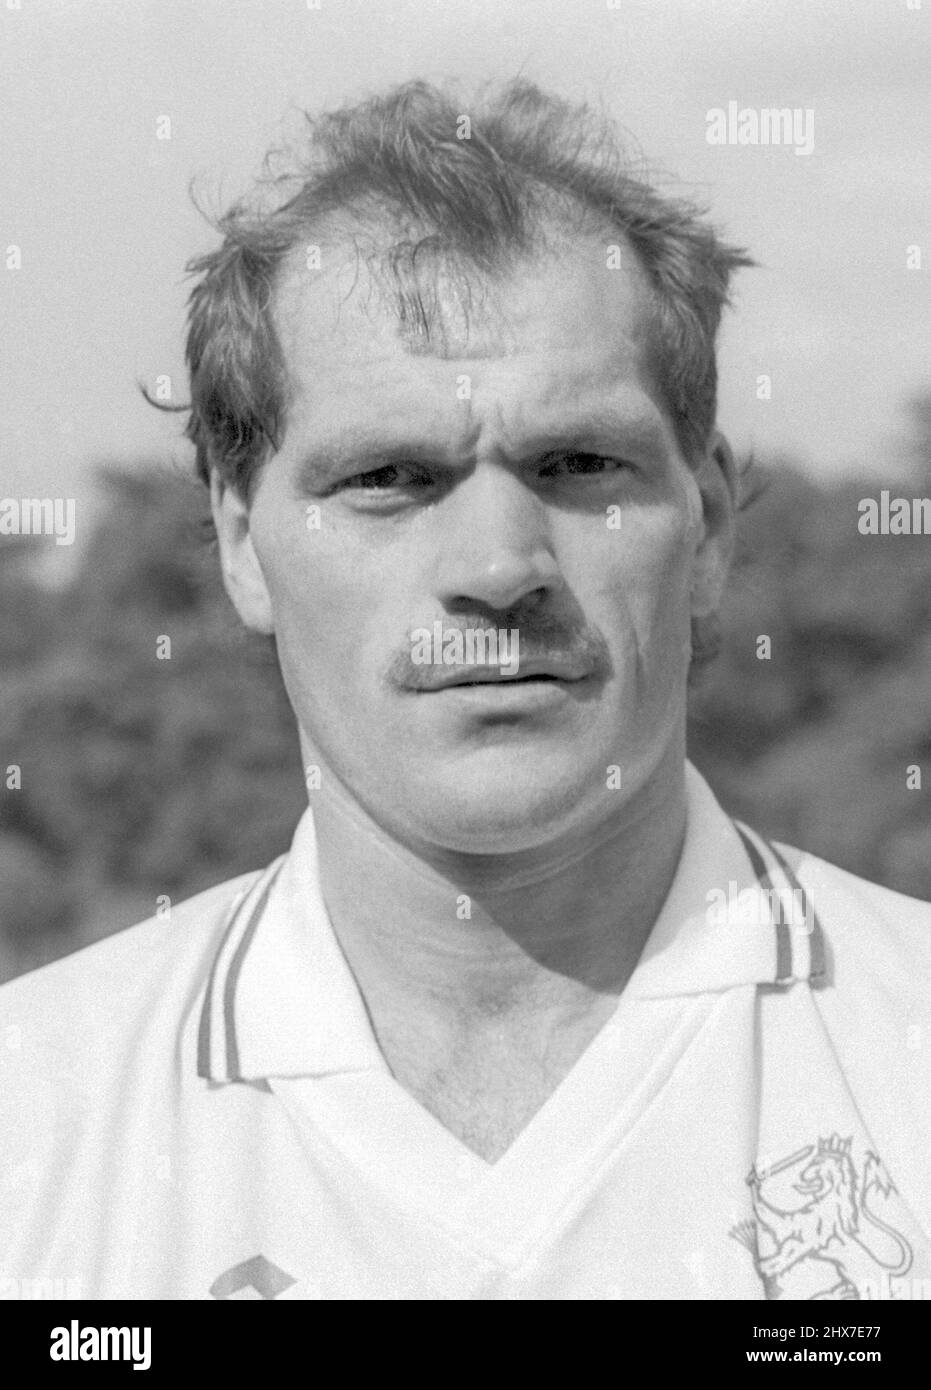 JAN WOUTERS Football Bayern München and in Netherlands national team to European championship in Sweden 1992 Stock Photo